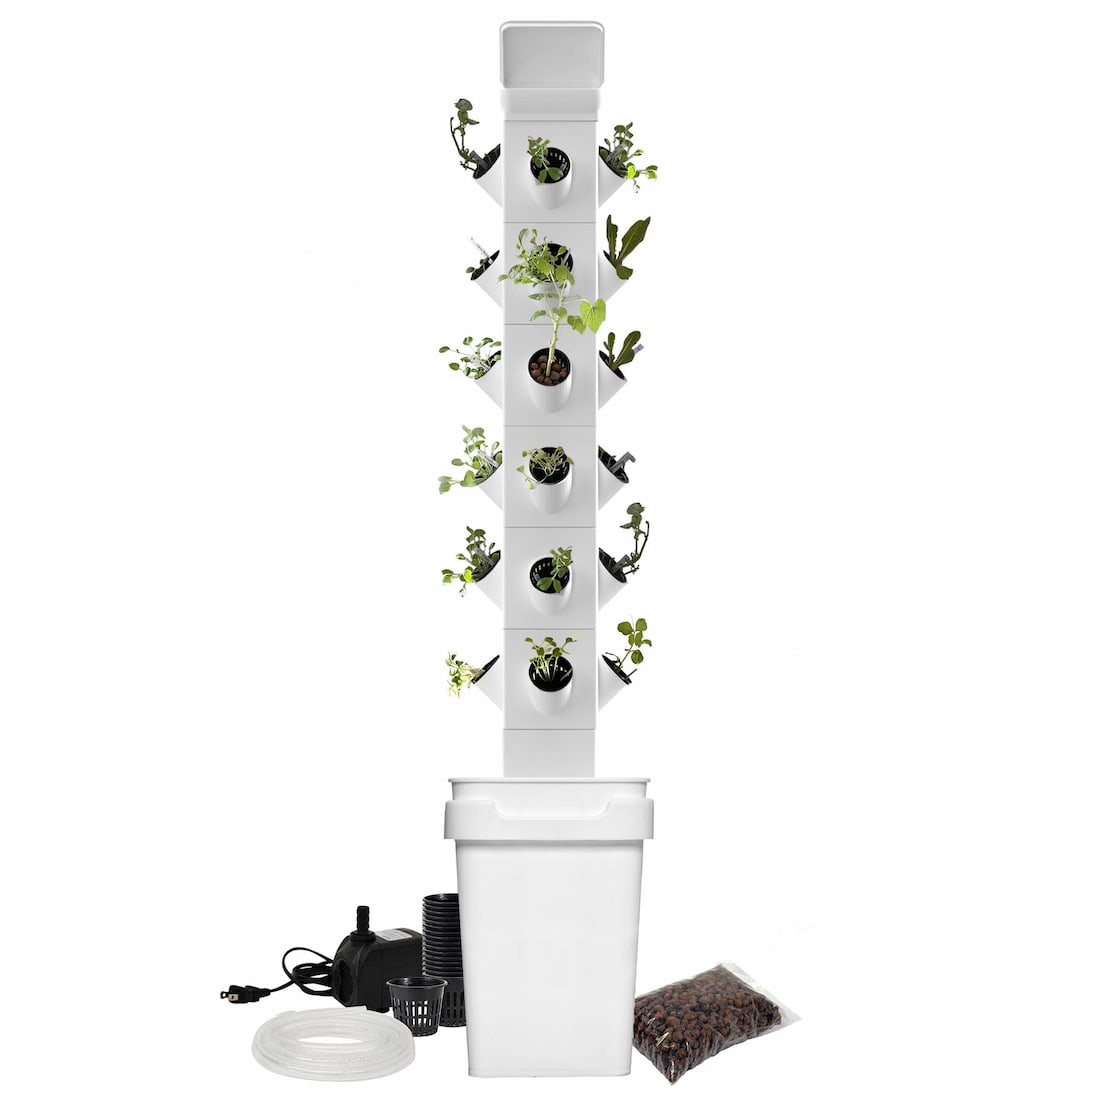 EXO Hydroponic Growing Vertical Tower System at Amazon